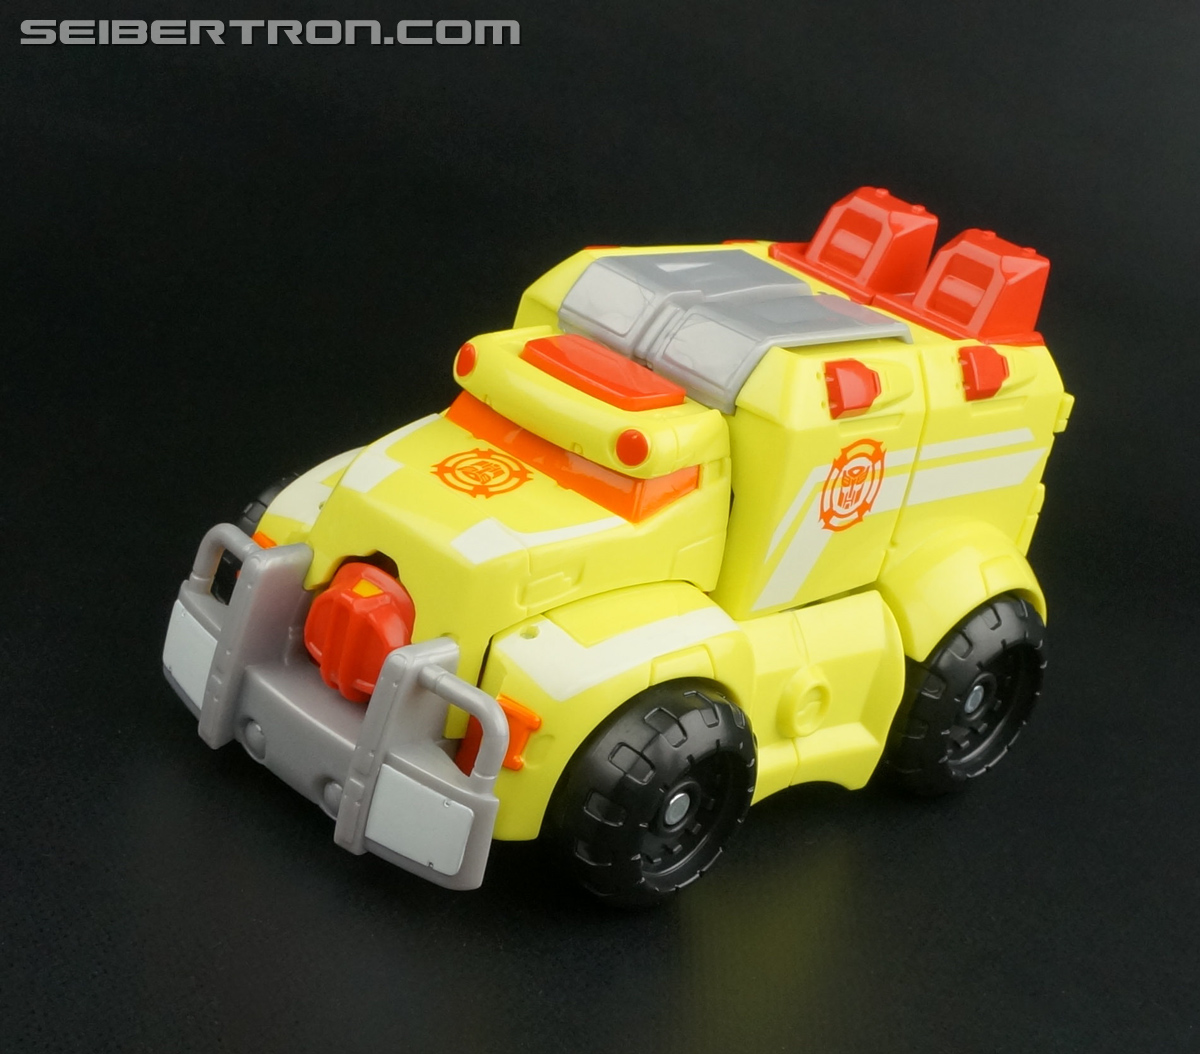 Transformers Rescue Bots Heatwave the Fire-Bot (Image #10 of 61)